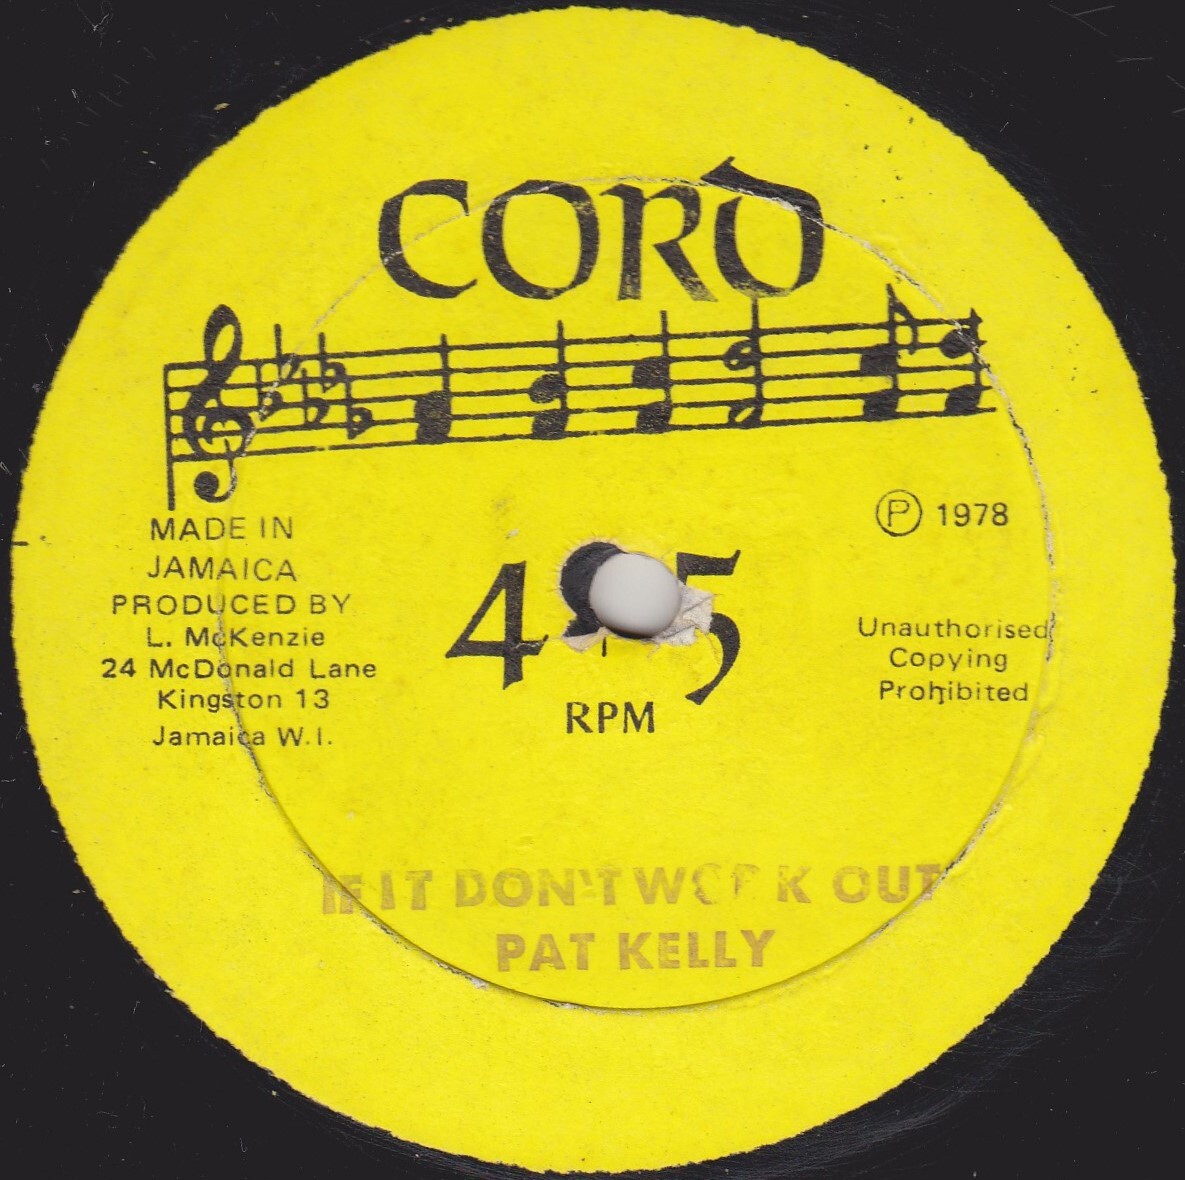 ★☆ 【12inch】 IF IT DON'T WORK OUT / PAT KELLY (CORD) ☆★_画像1